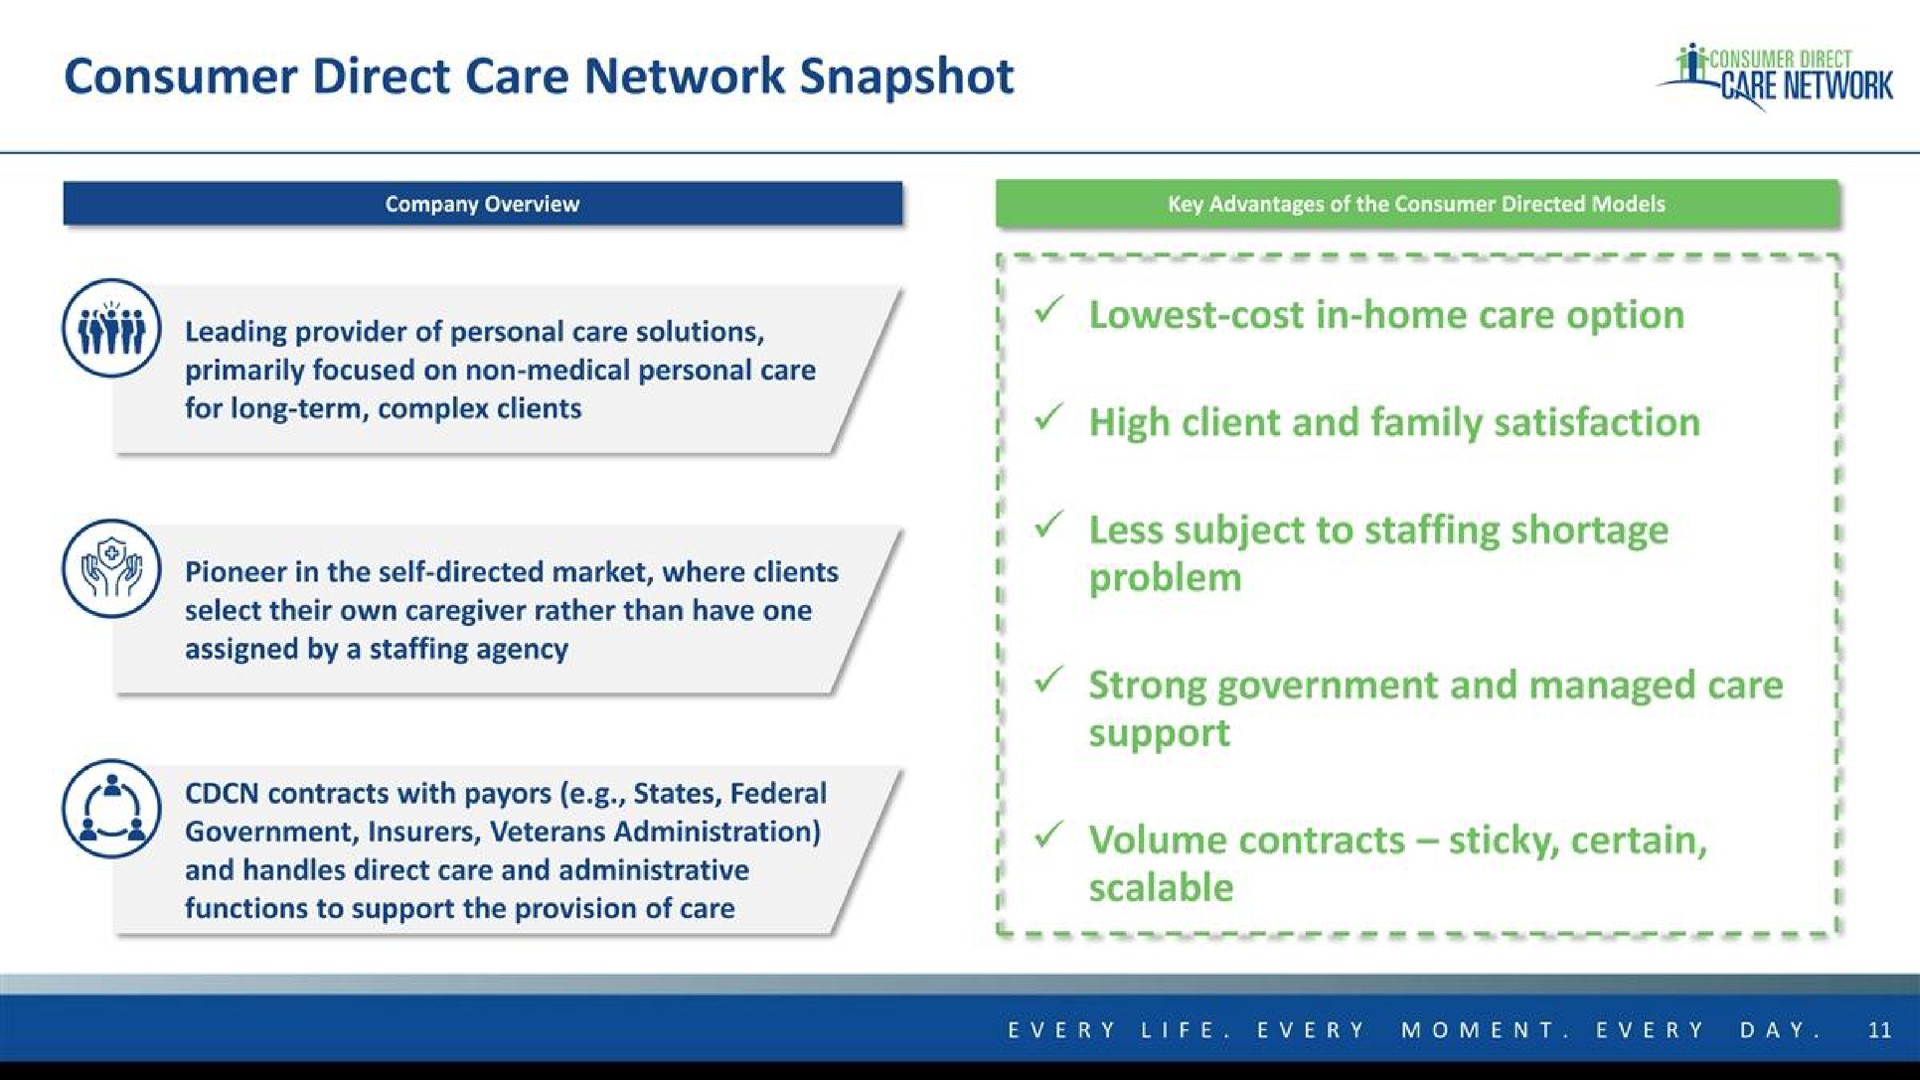 consumer direct care network snapshot are network | Consumer Direct Care Network